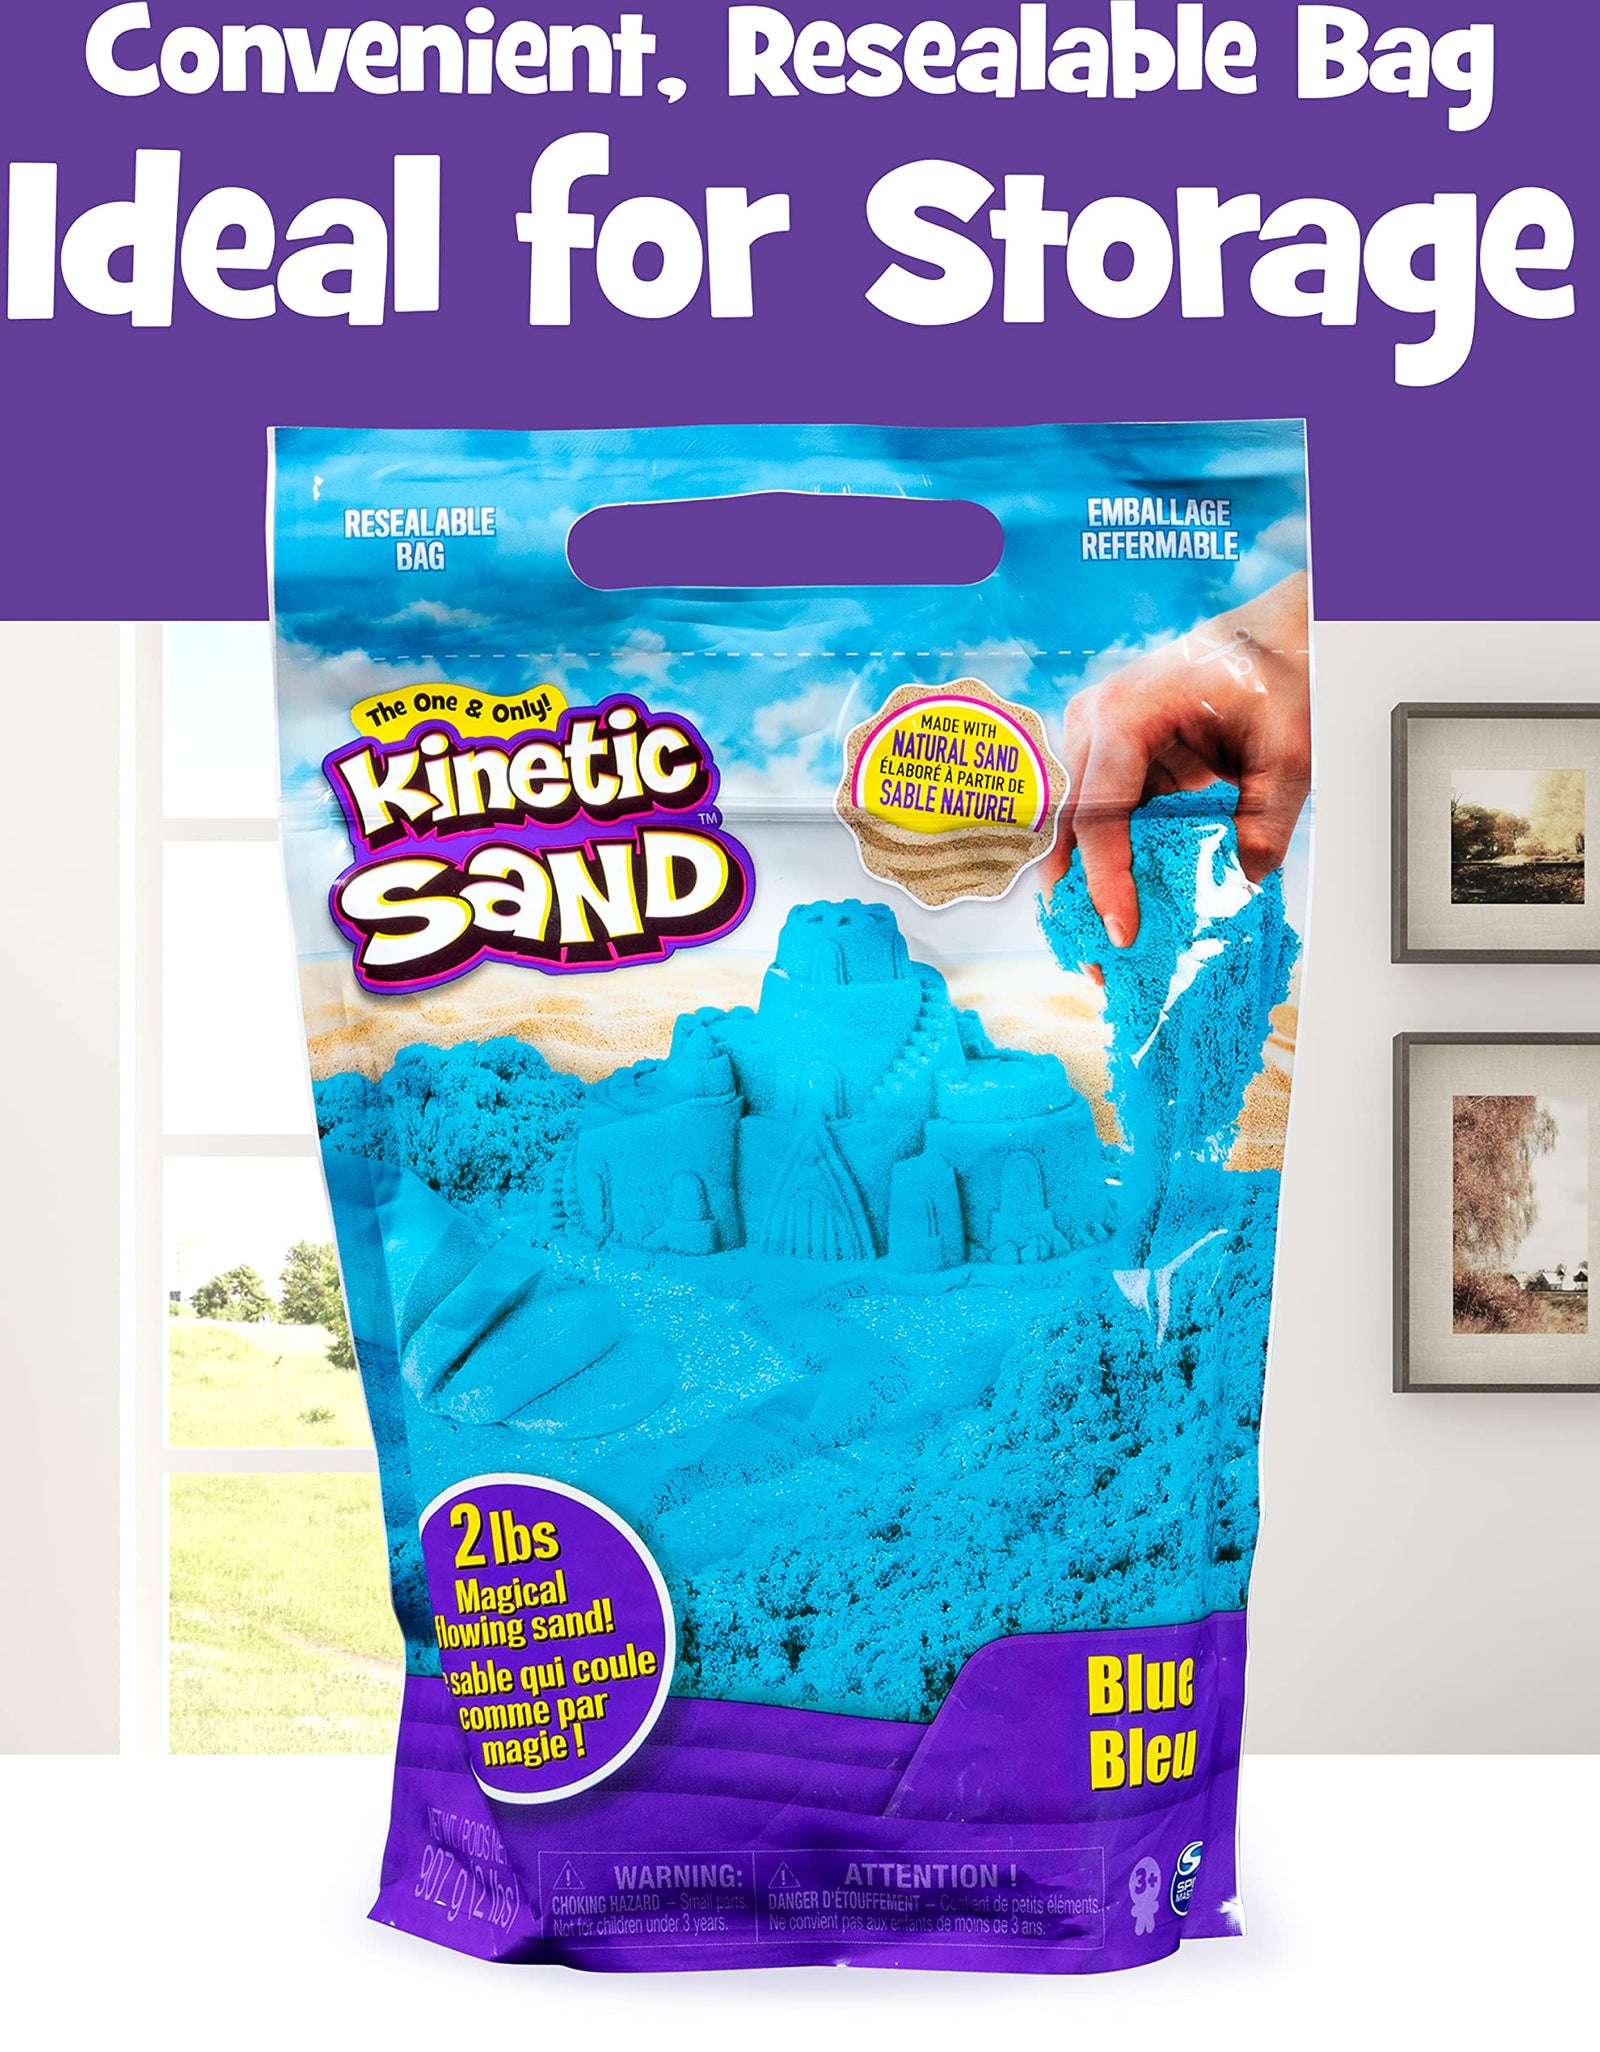 Kinetic Sand, The Original Moldable Sensory Play Sand Toys for Kids, Blue, 2 lb. Resealable Bag, Ages 3+